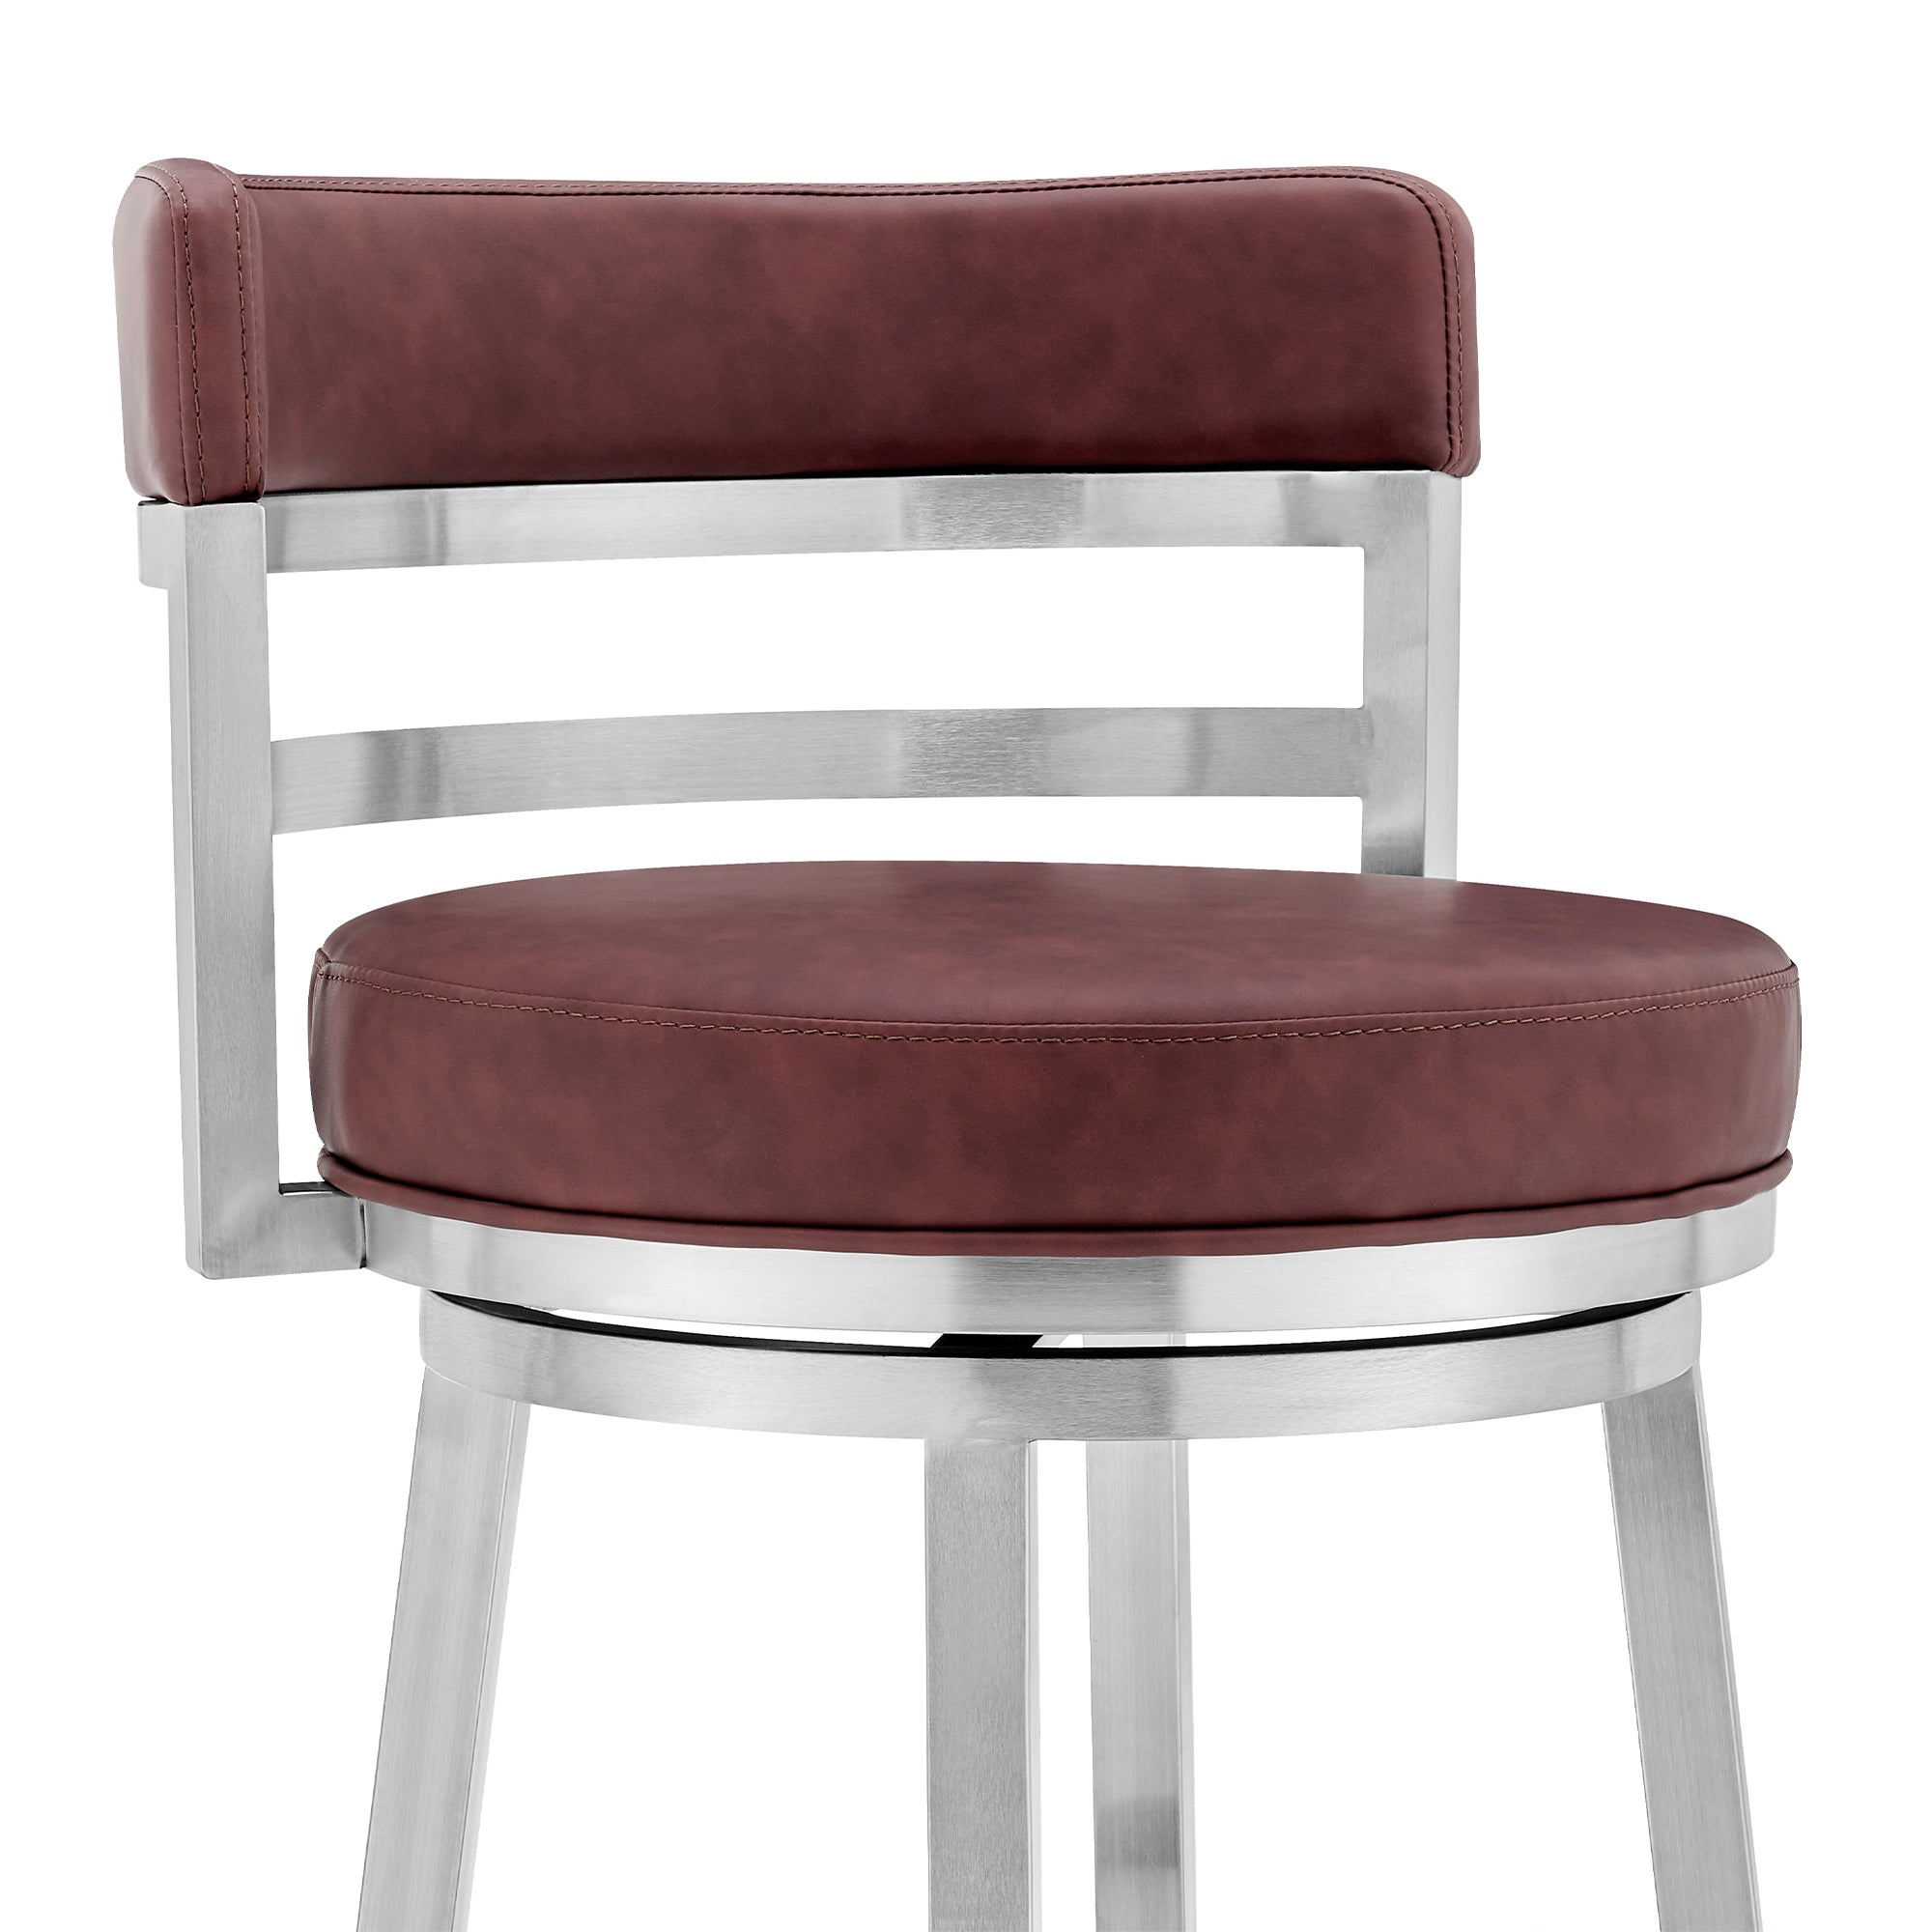 Armen Living - Titana Bar or Counter Stool in Red Faux Leather and Metal - 840254335165